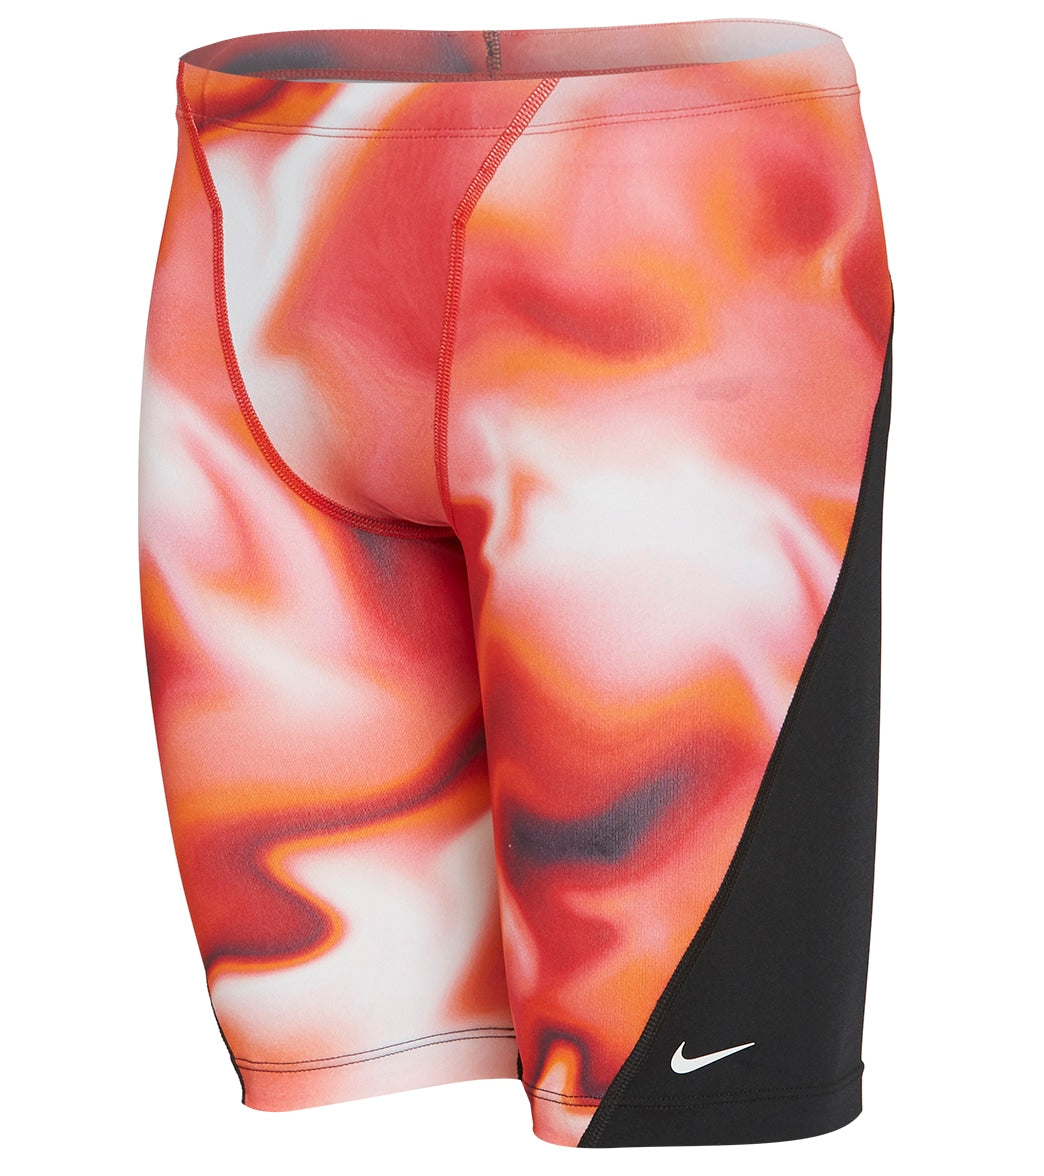 Nike Men's HydraStrong Amp Axis Jammer Swimsuit at SwimOutlet.com